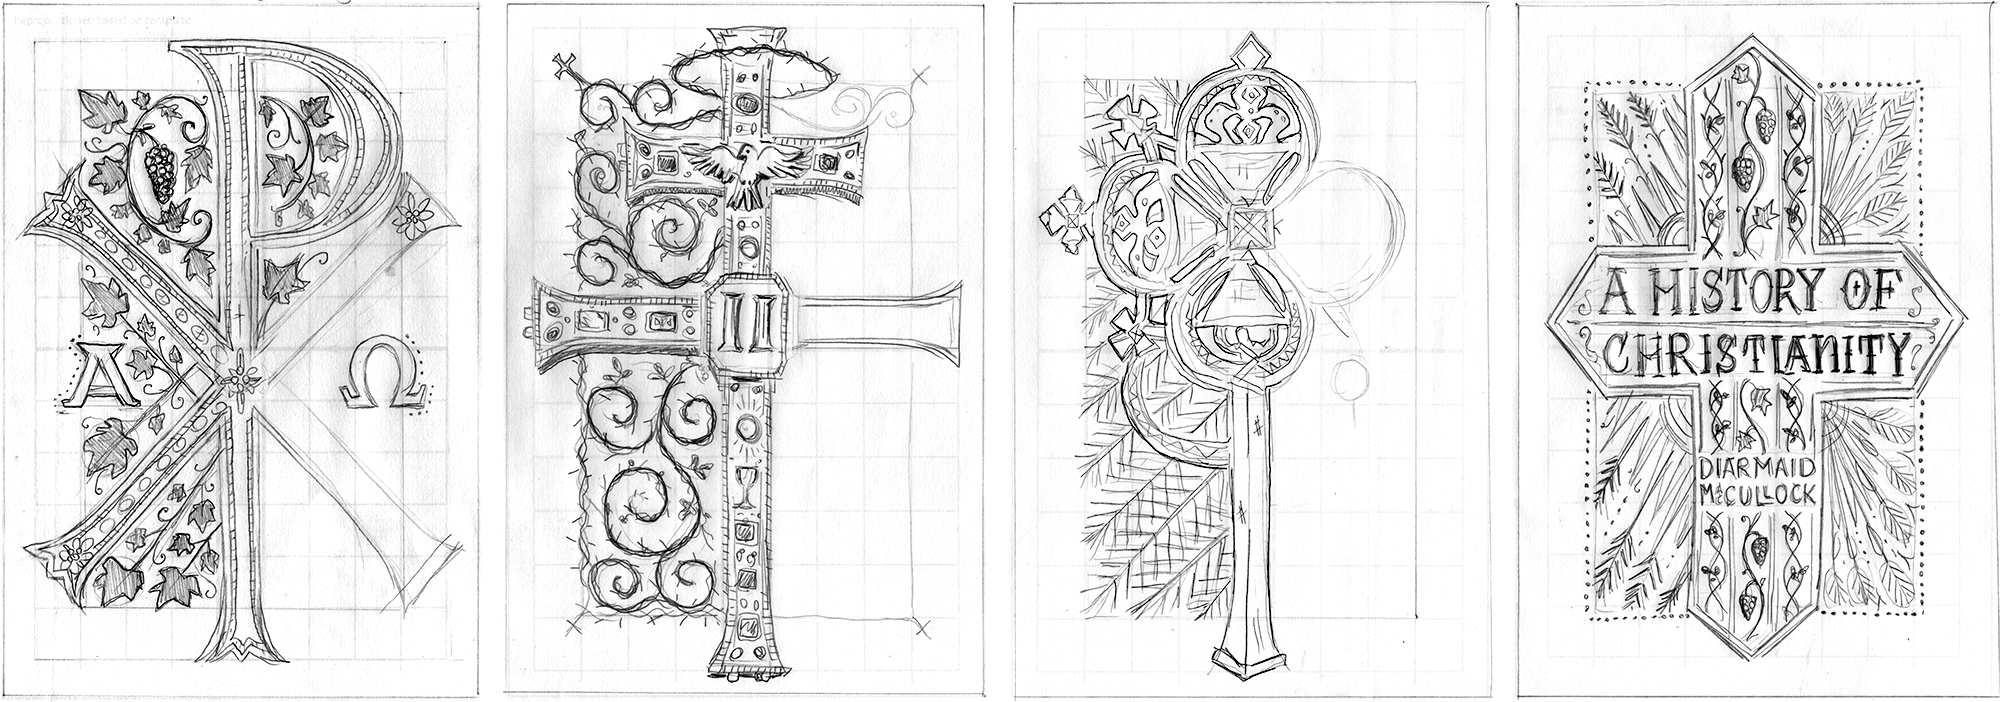 A History of Christianity, cover sketches